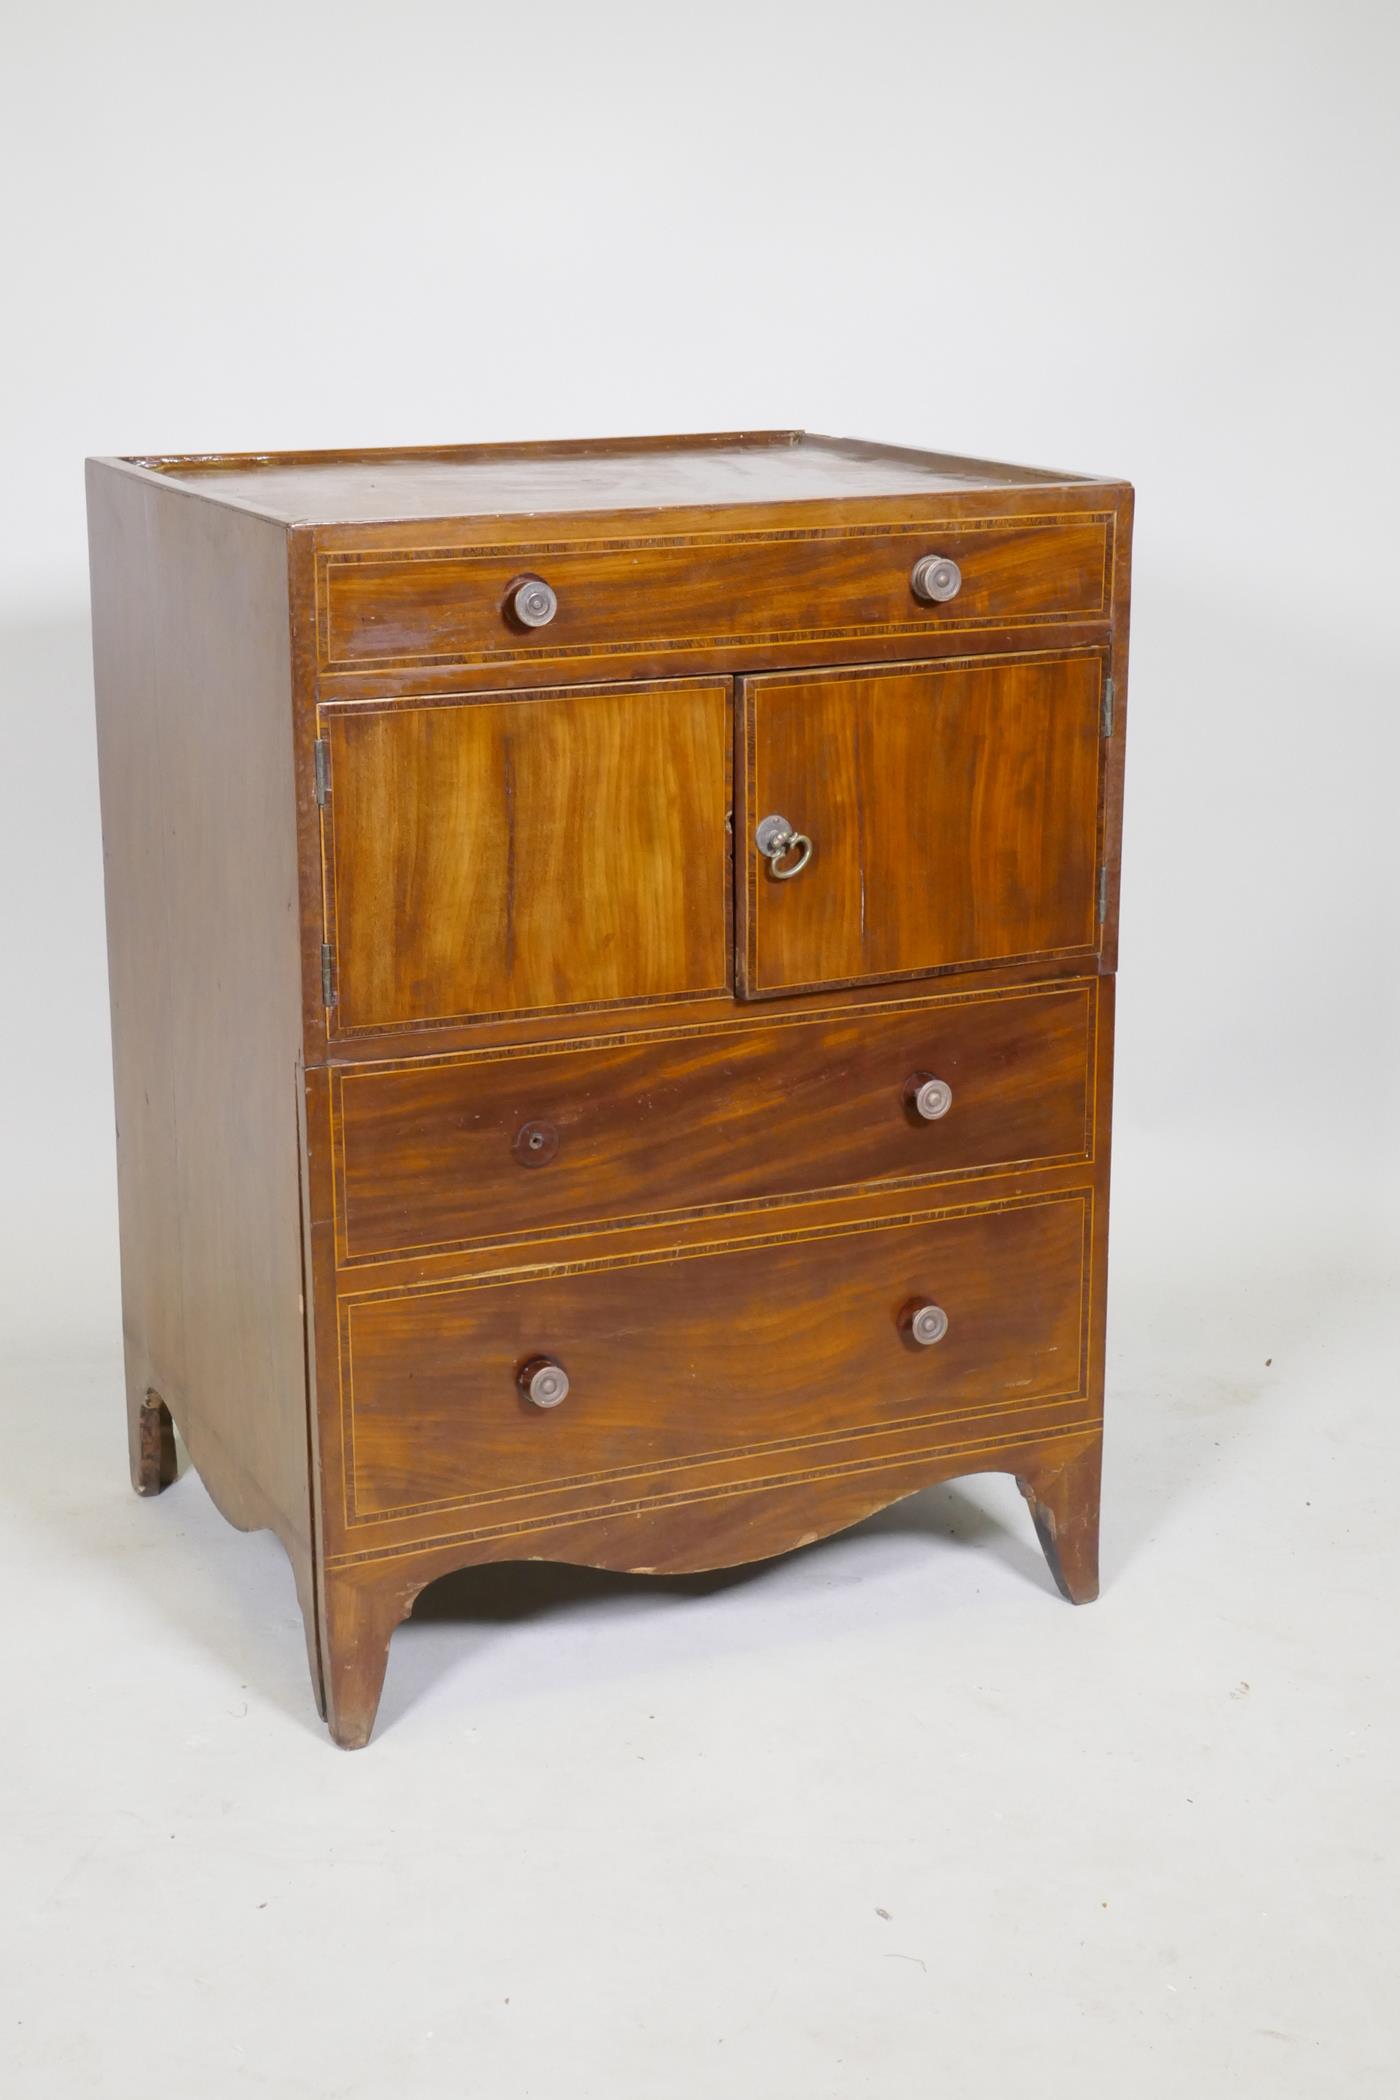 A Georgian mahogany commode/dressing chest with lift up top, two cupboards and pull out bottom